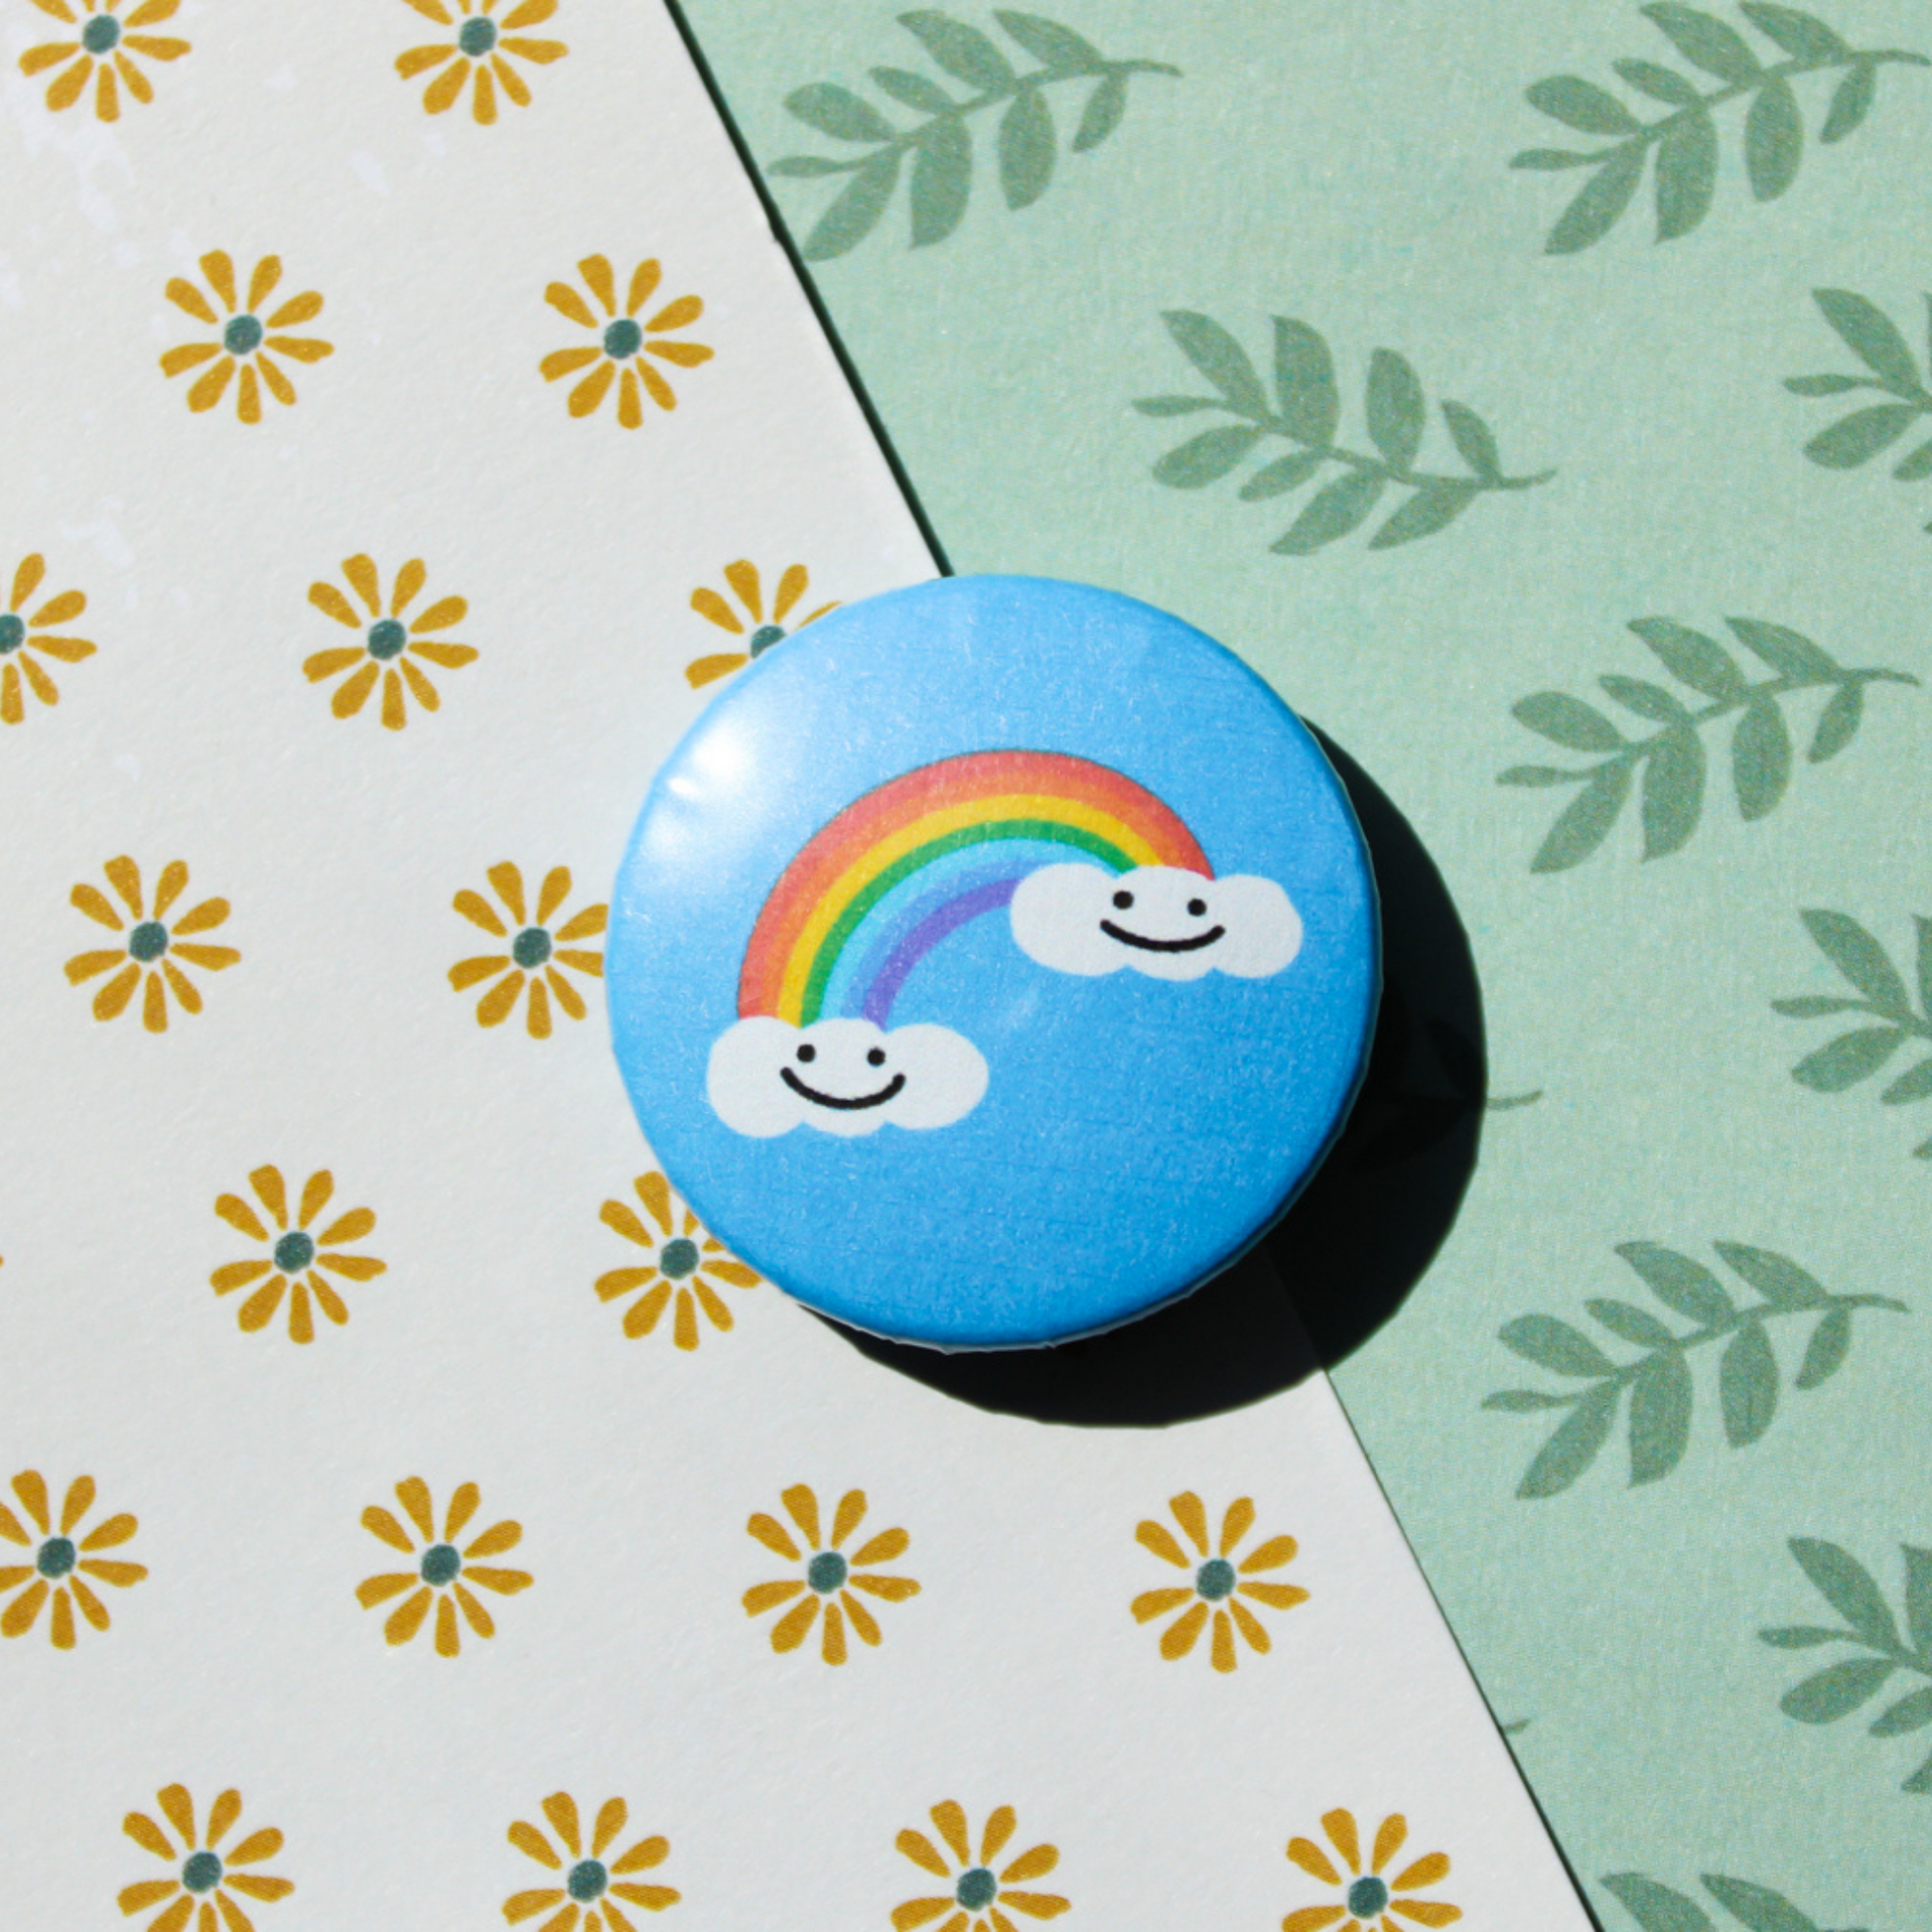 A leaf and floral pattern background. On top is a blue circle button with two smiling white clouds. In between those clouds is a bright rainbow.